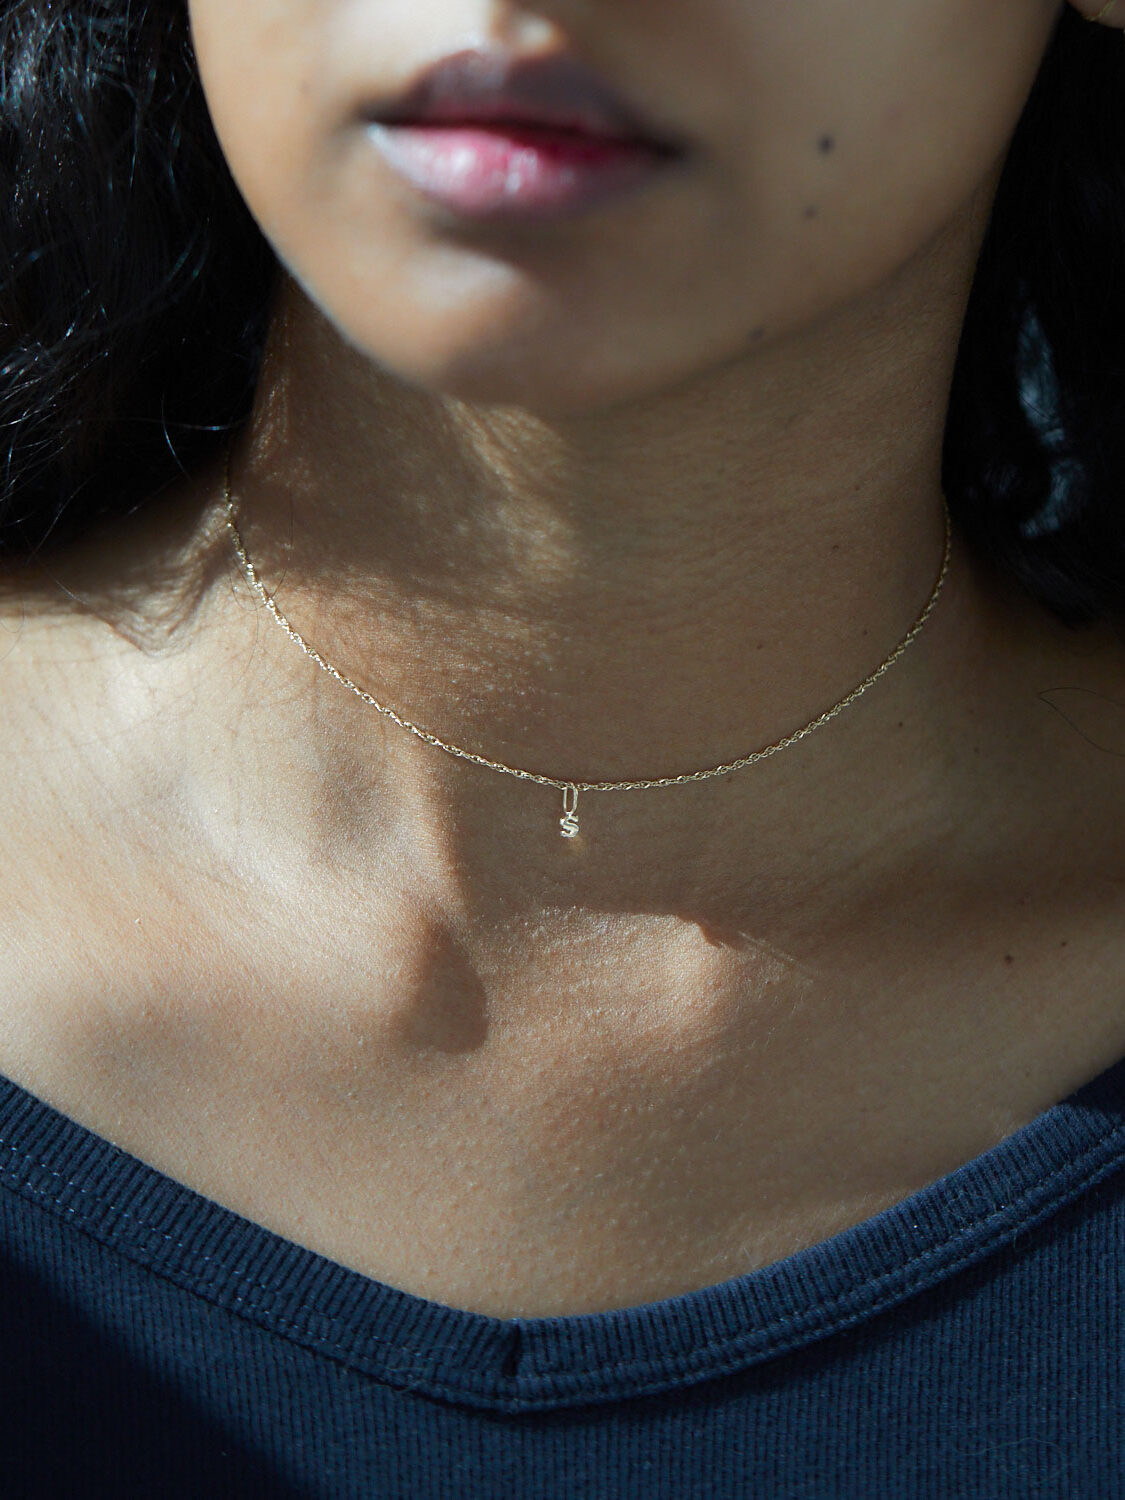 Close-up of a woman's lower face and neck, showing her wearing a gold necklace, with sunlight highlighting her skin.